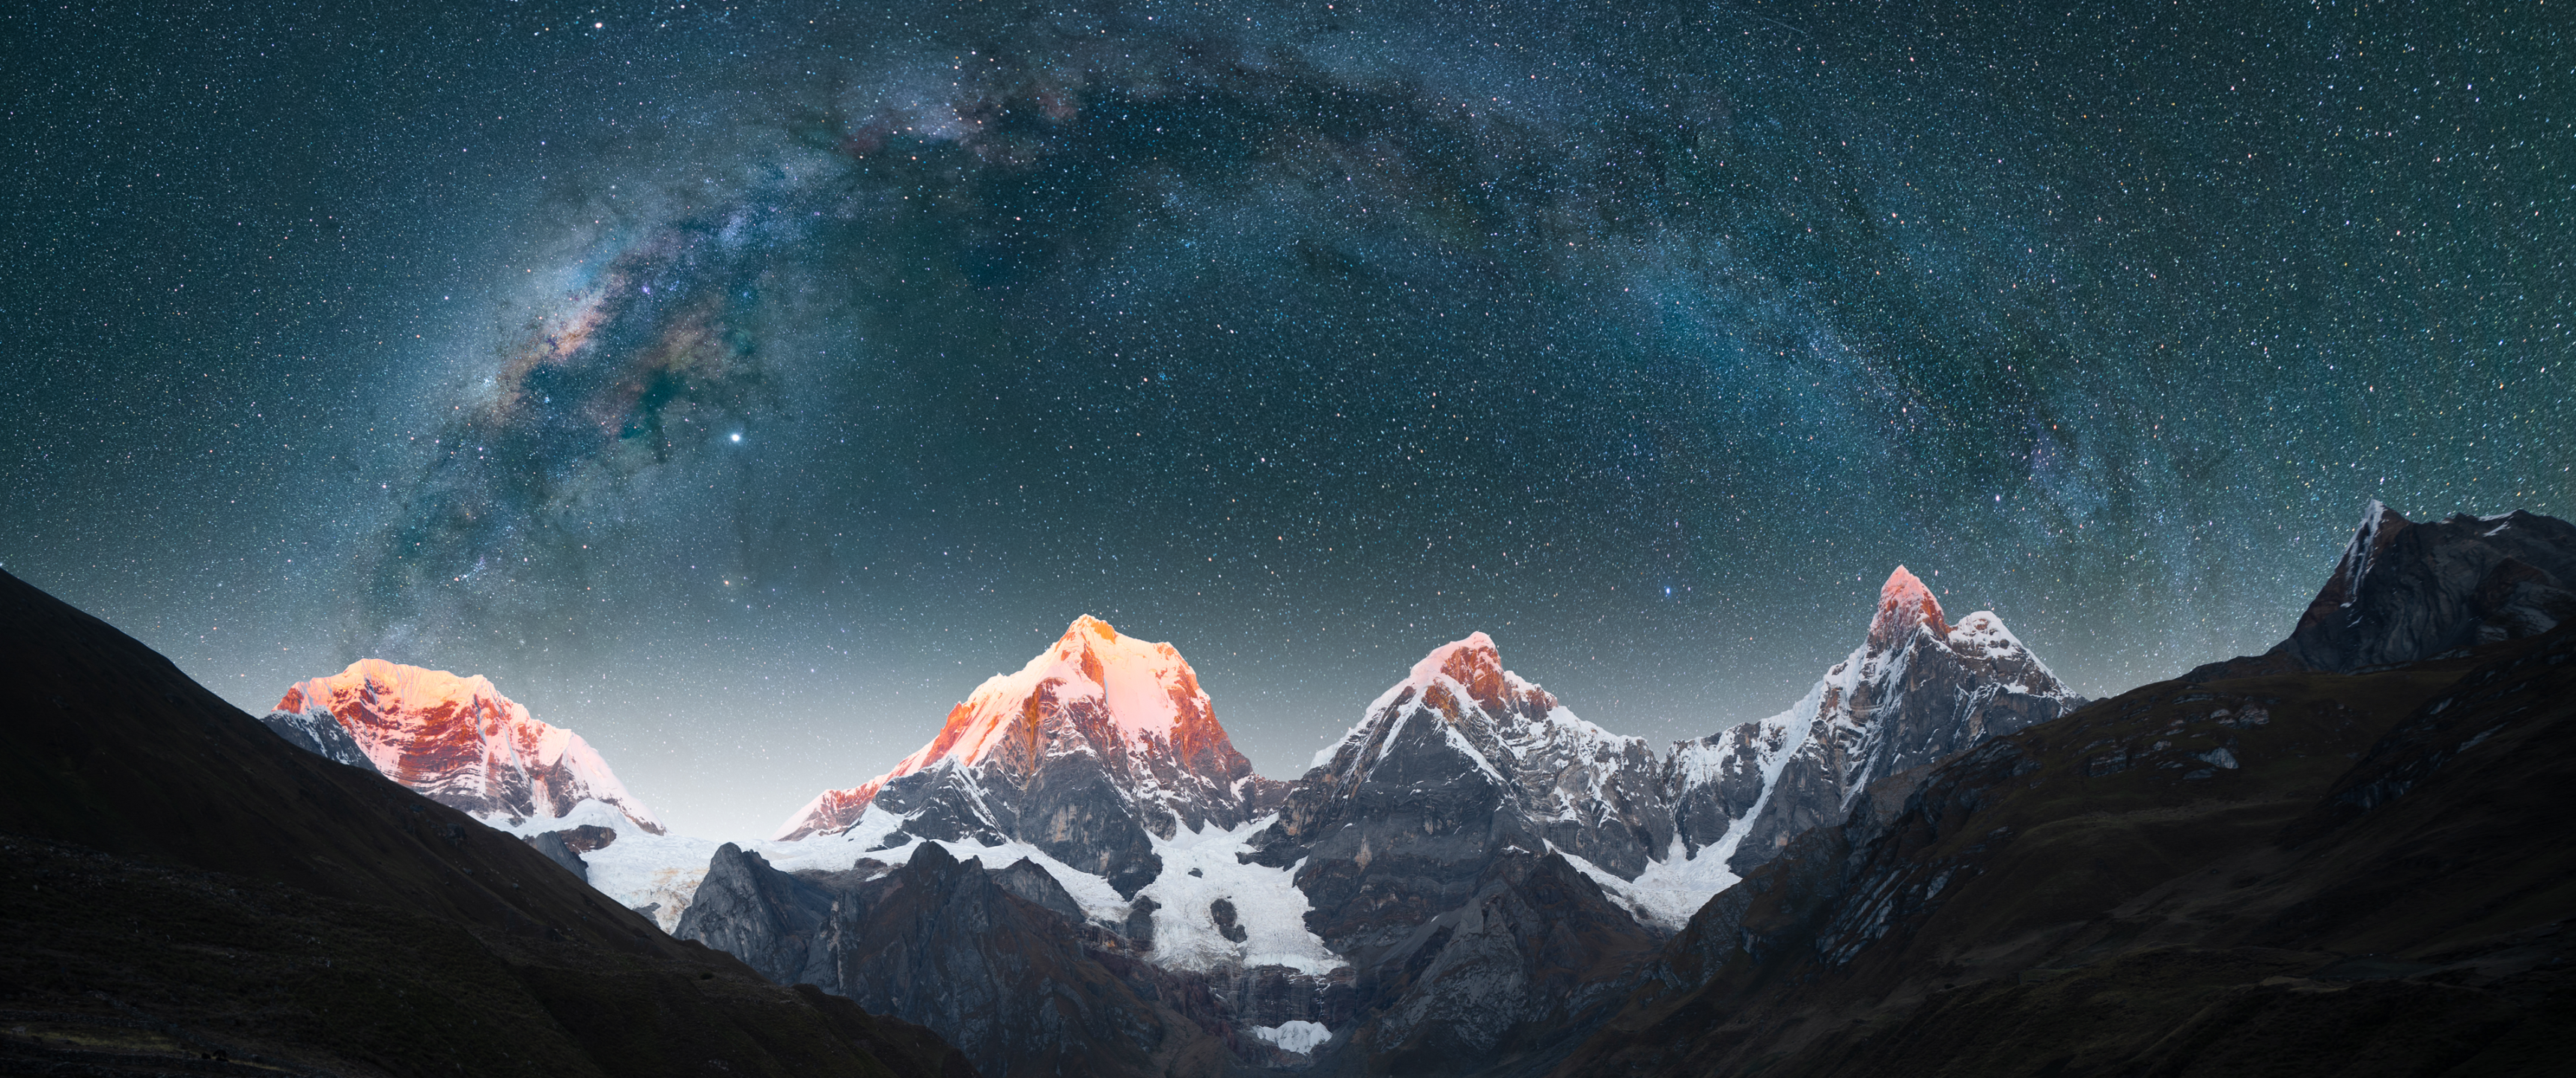 General 3441x1440 mountains Milky Way landscape starry night stars night sky snow nature